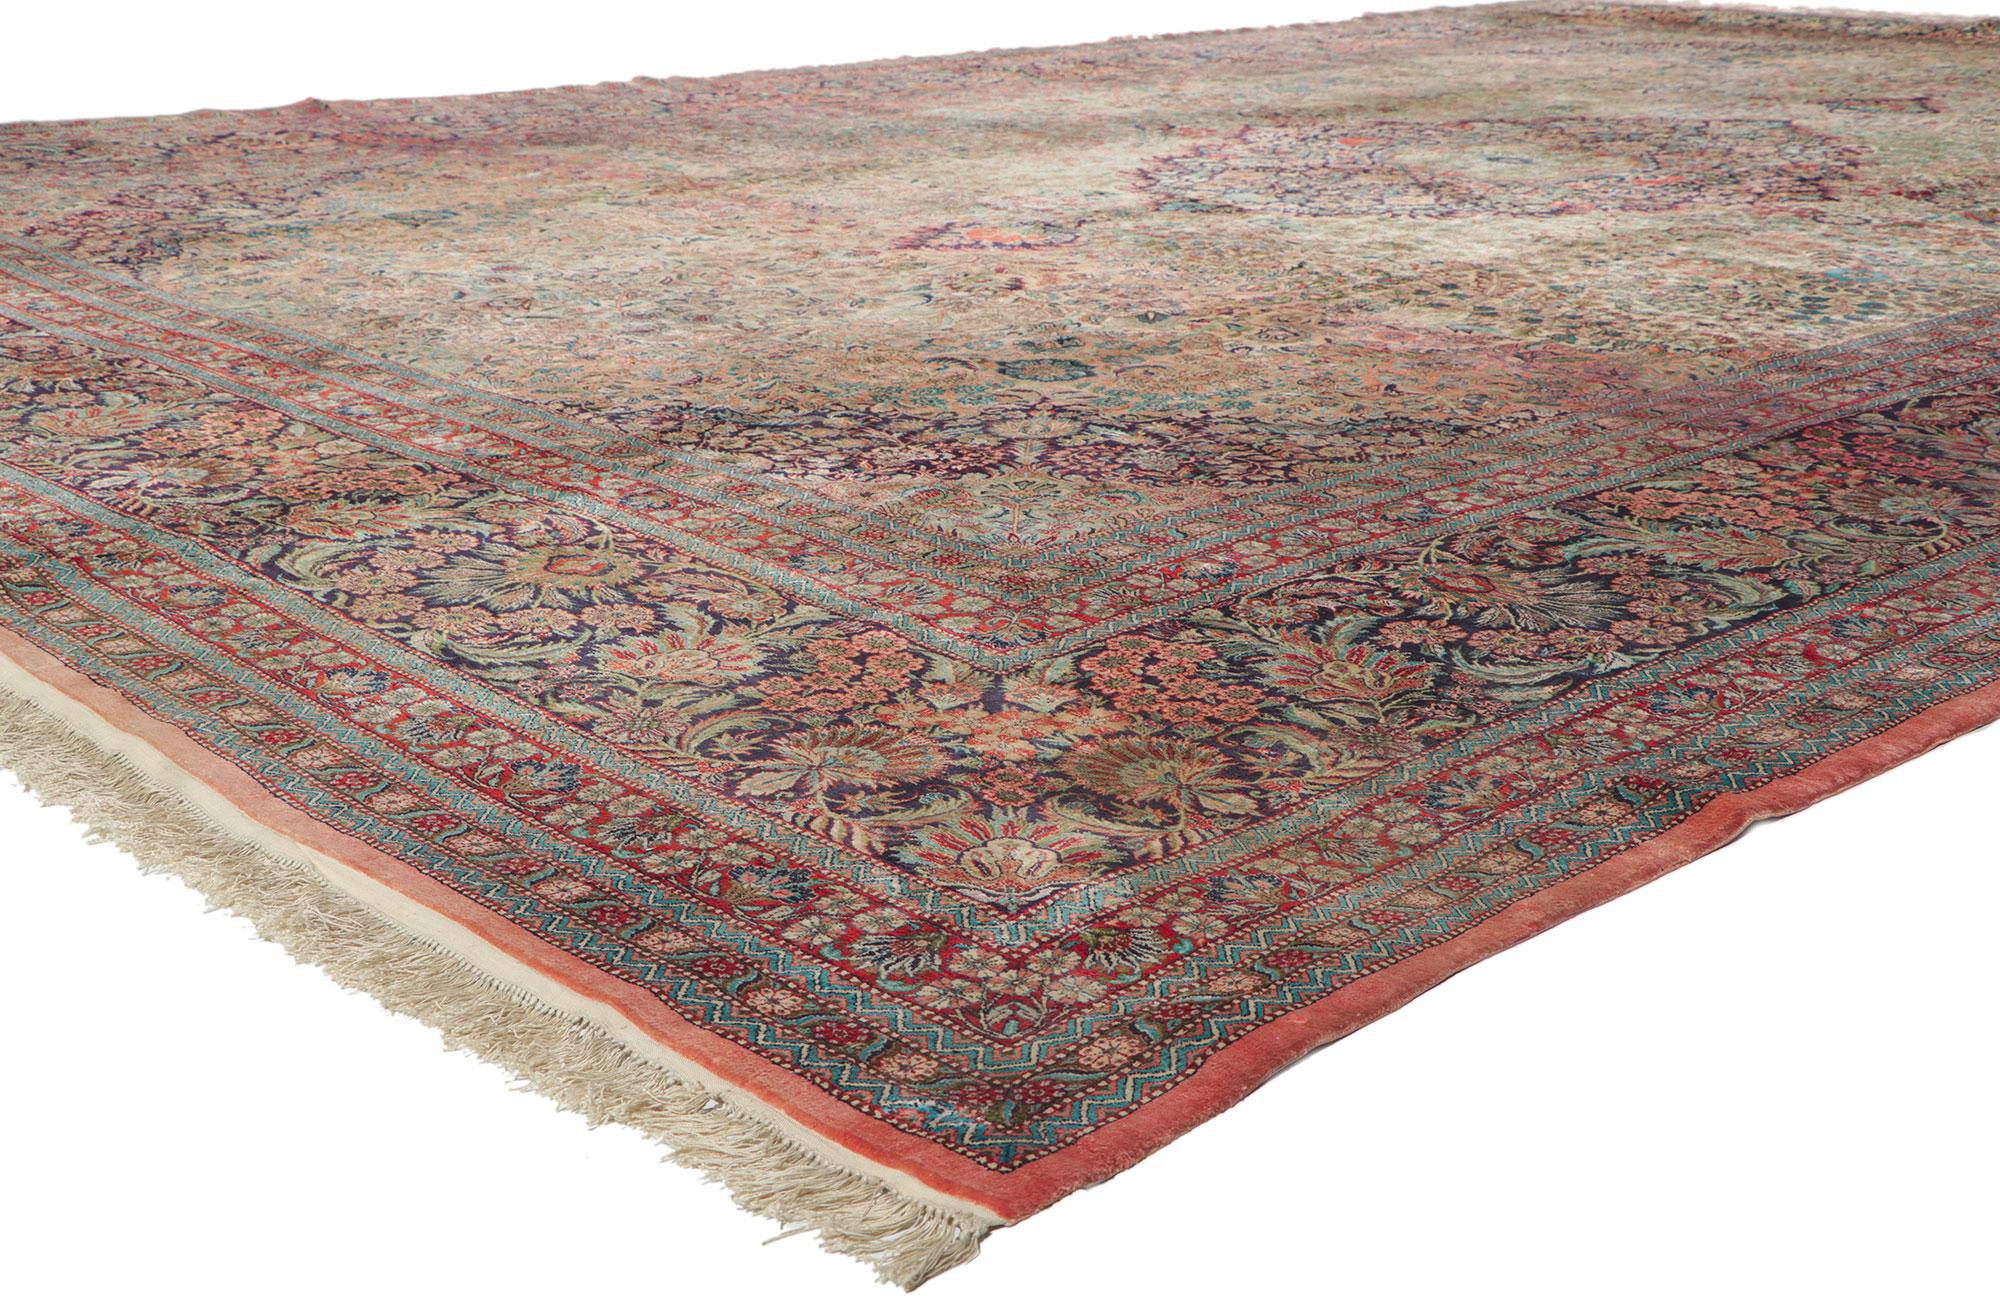 78337 Oversized Vintage Chinese Tabriz Silk Rug, 11'11 x 18'02. Emanating a timeless floral design, incredible detail and texture, this hand knotted silk vintage Chinese Tabriz rug is a captivating vision of woven beauty. The ornate details and